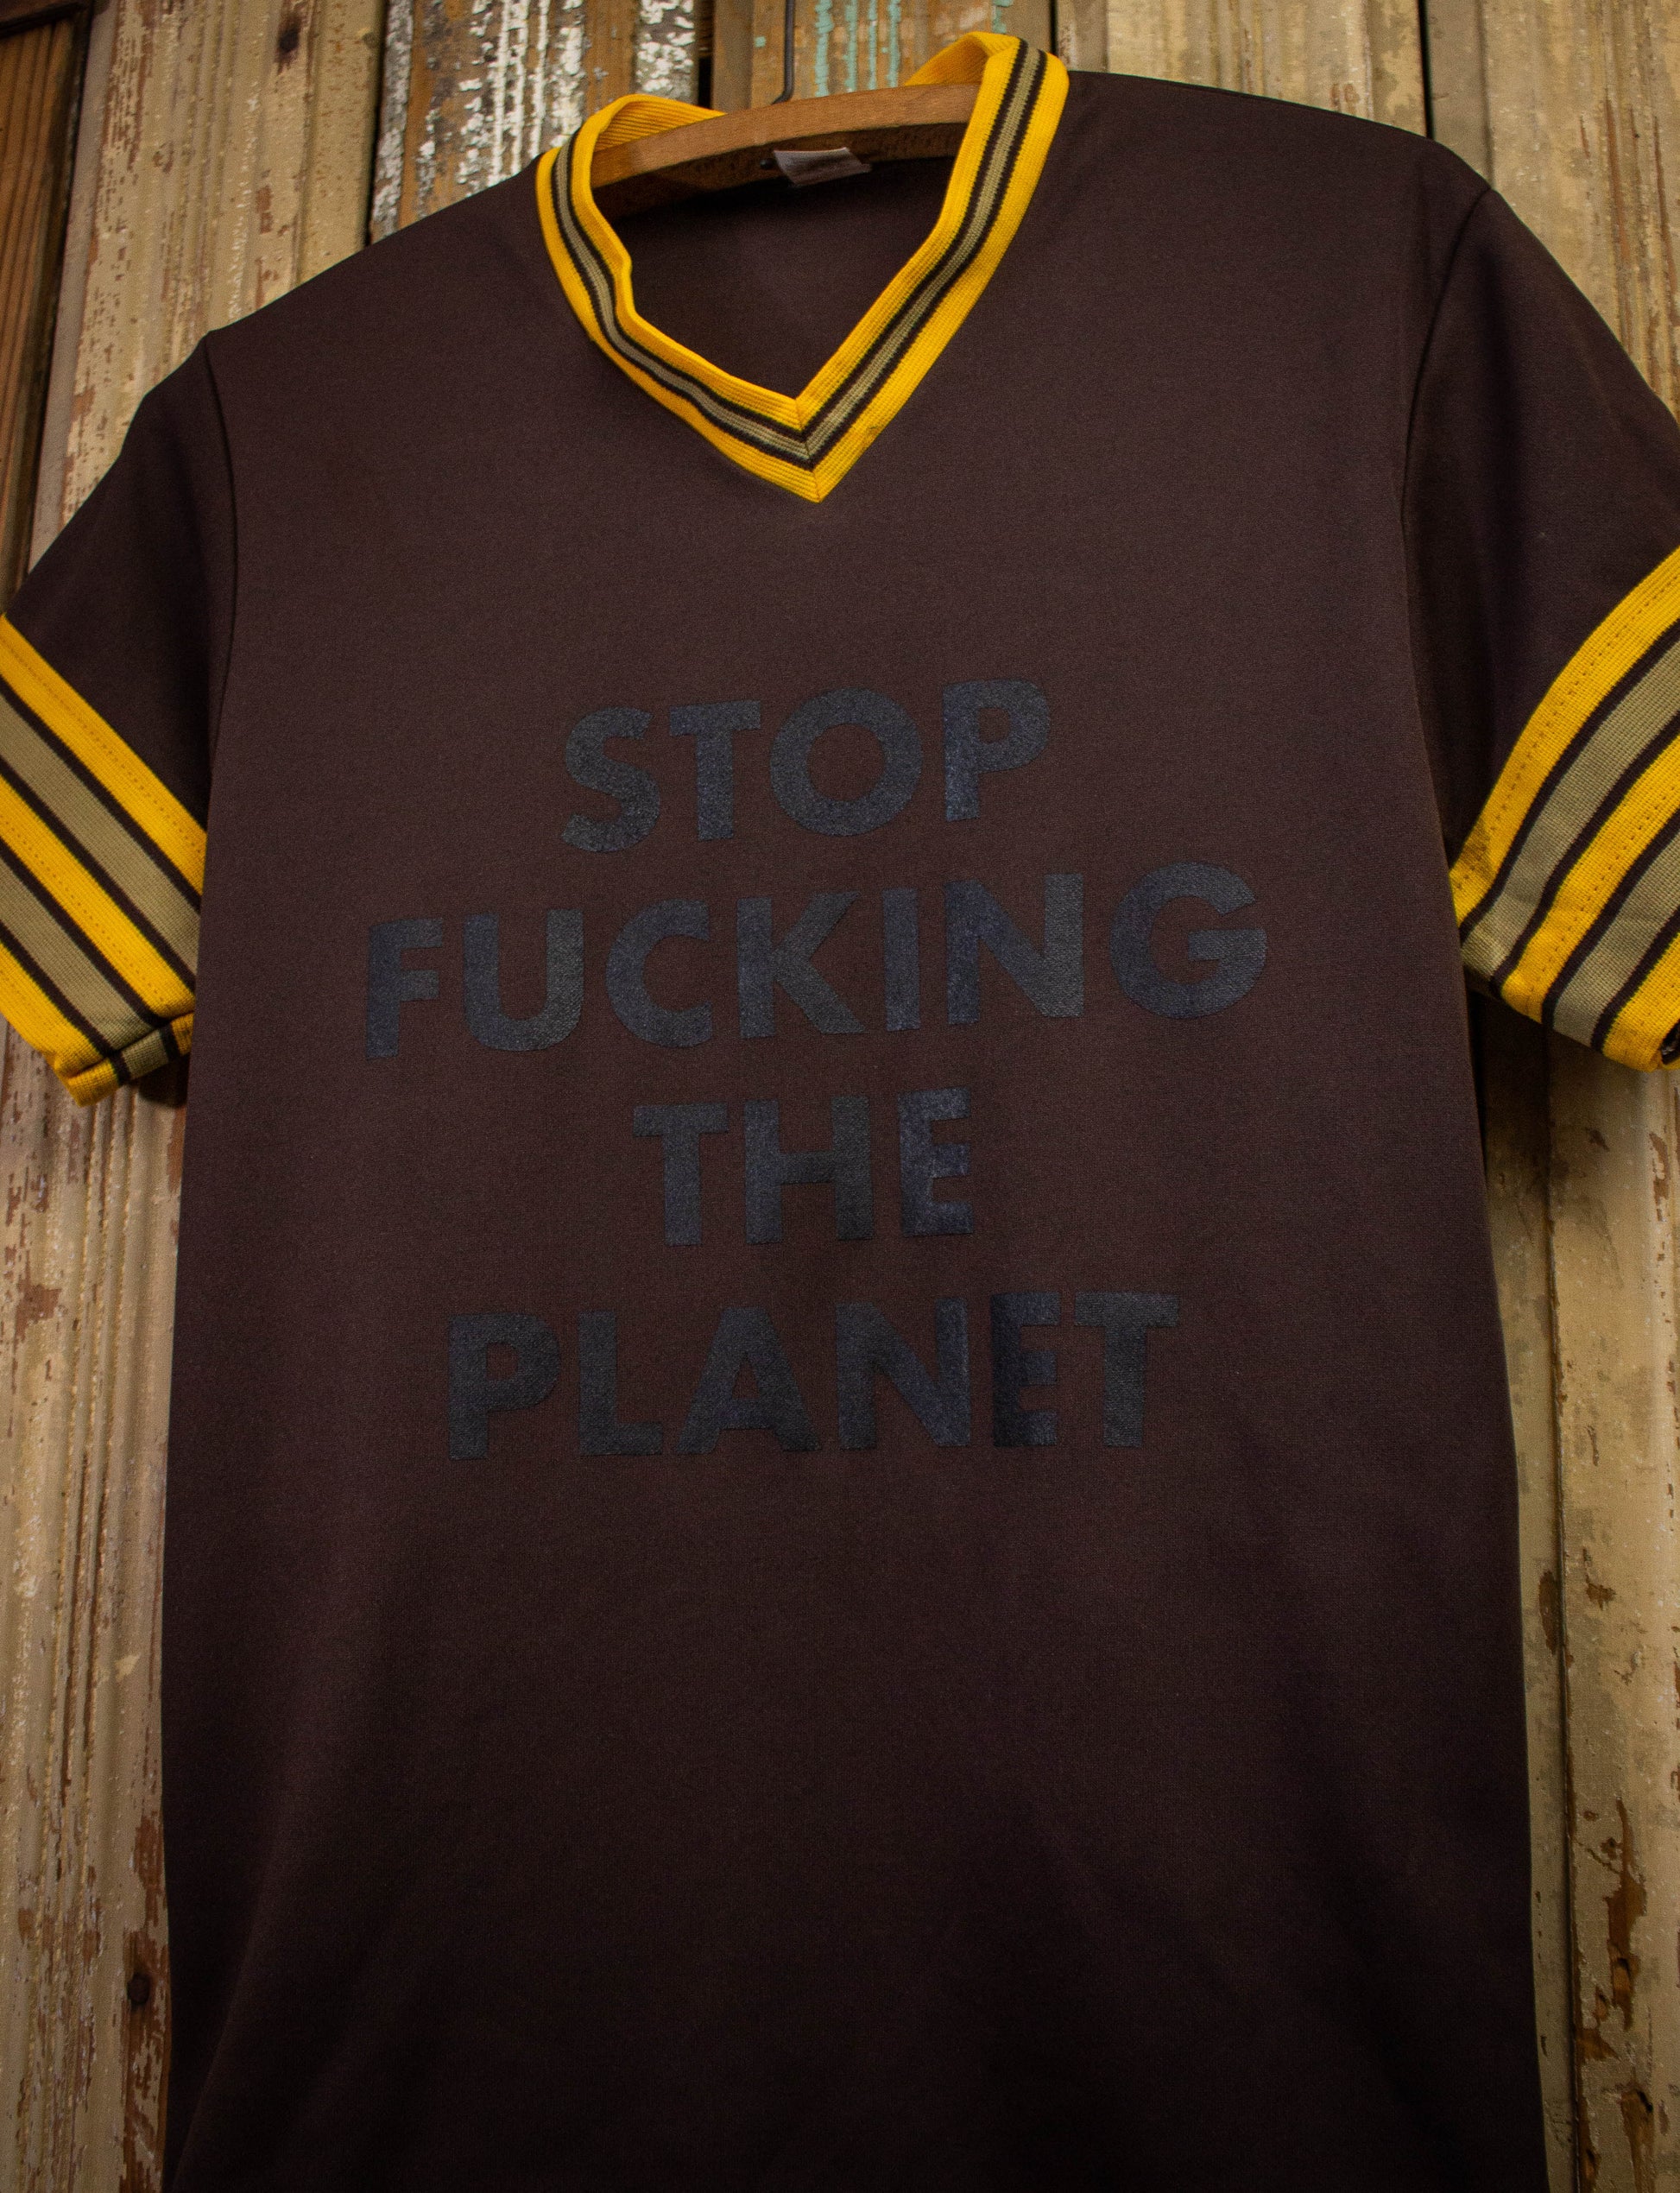 Stop Fucking The Planet Jersey Graphic T Shirt Brown and Yellow Small